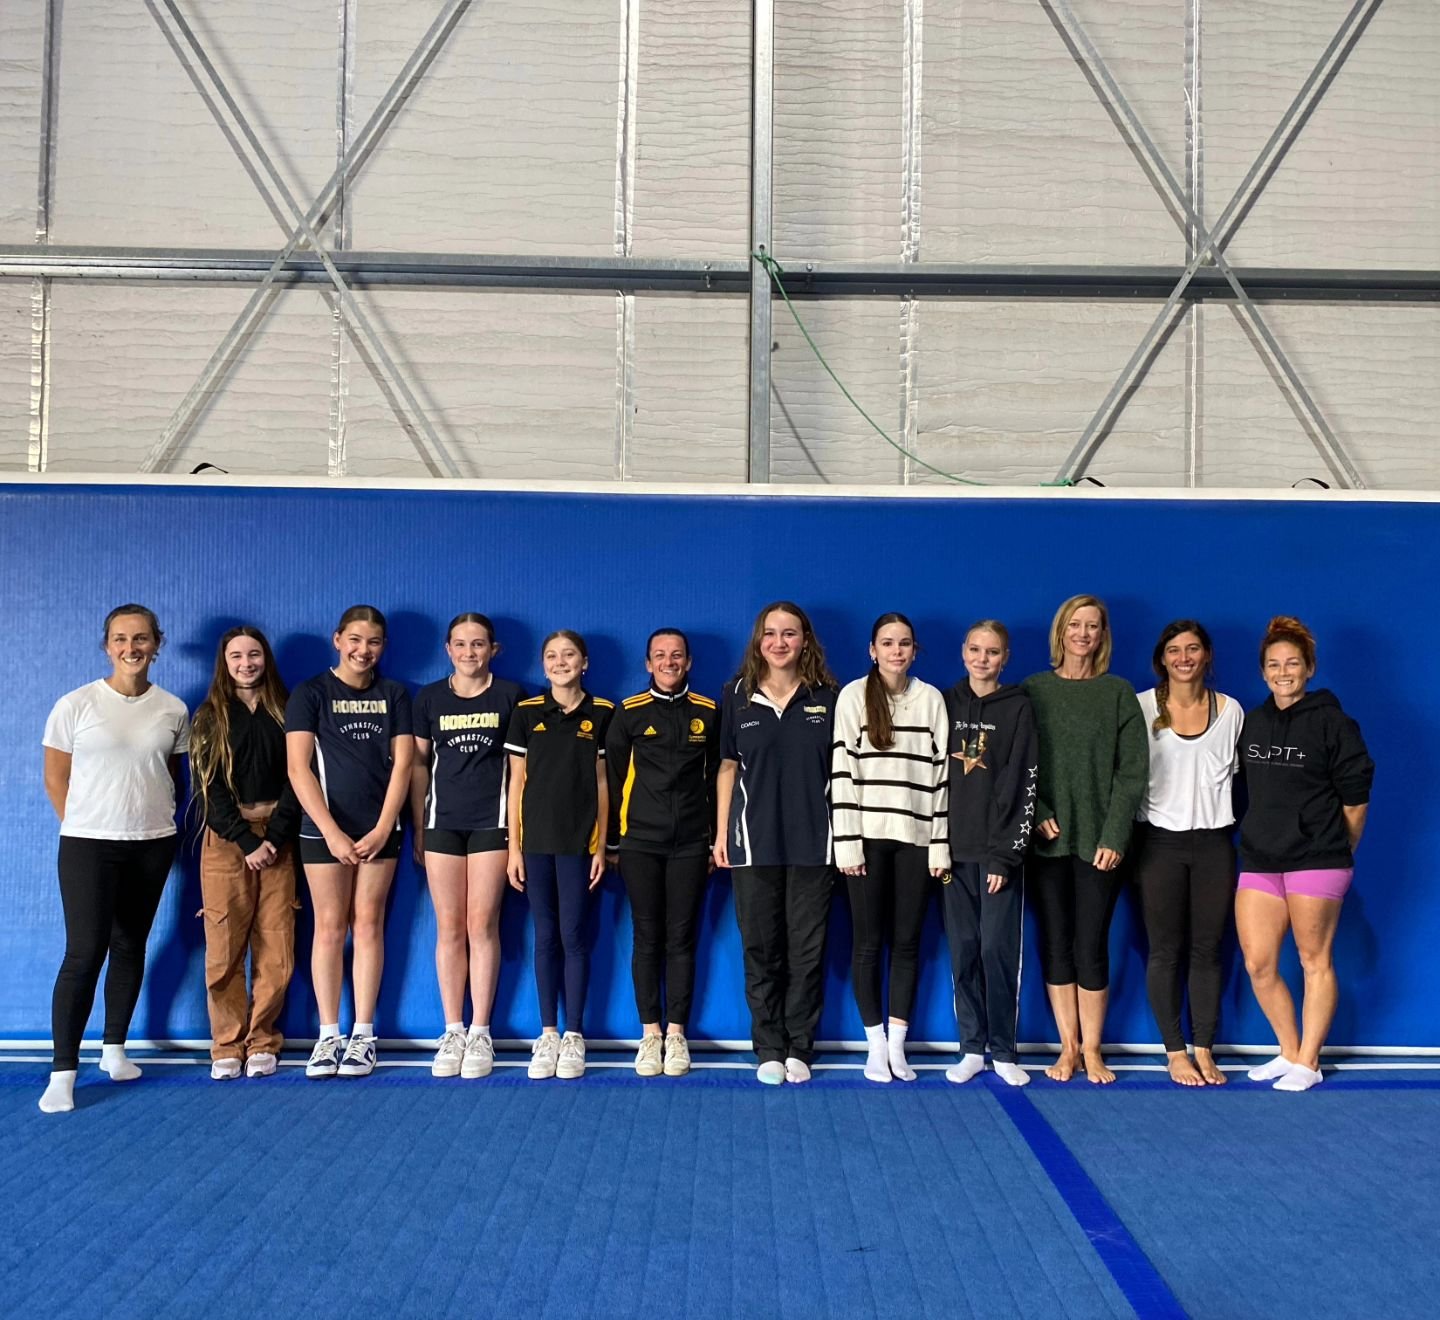 We are Team Horizon 💙💛

Our coaching team spent the morning together as part of our club development and training. We are so grateful to have such a strong team. A team that upholds our vision and purpose for our club and enriches the lives of our 